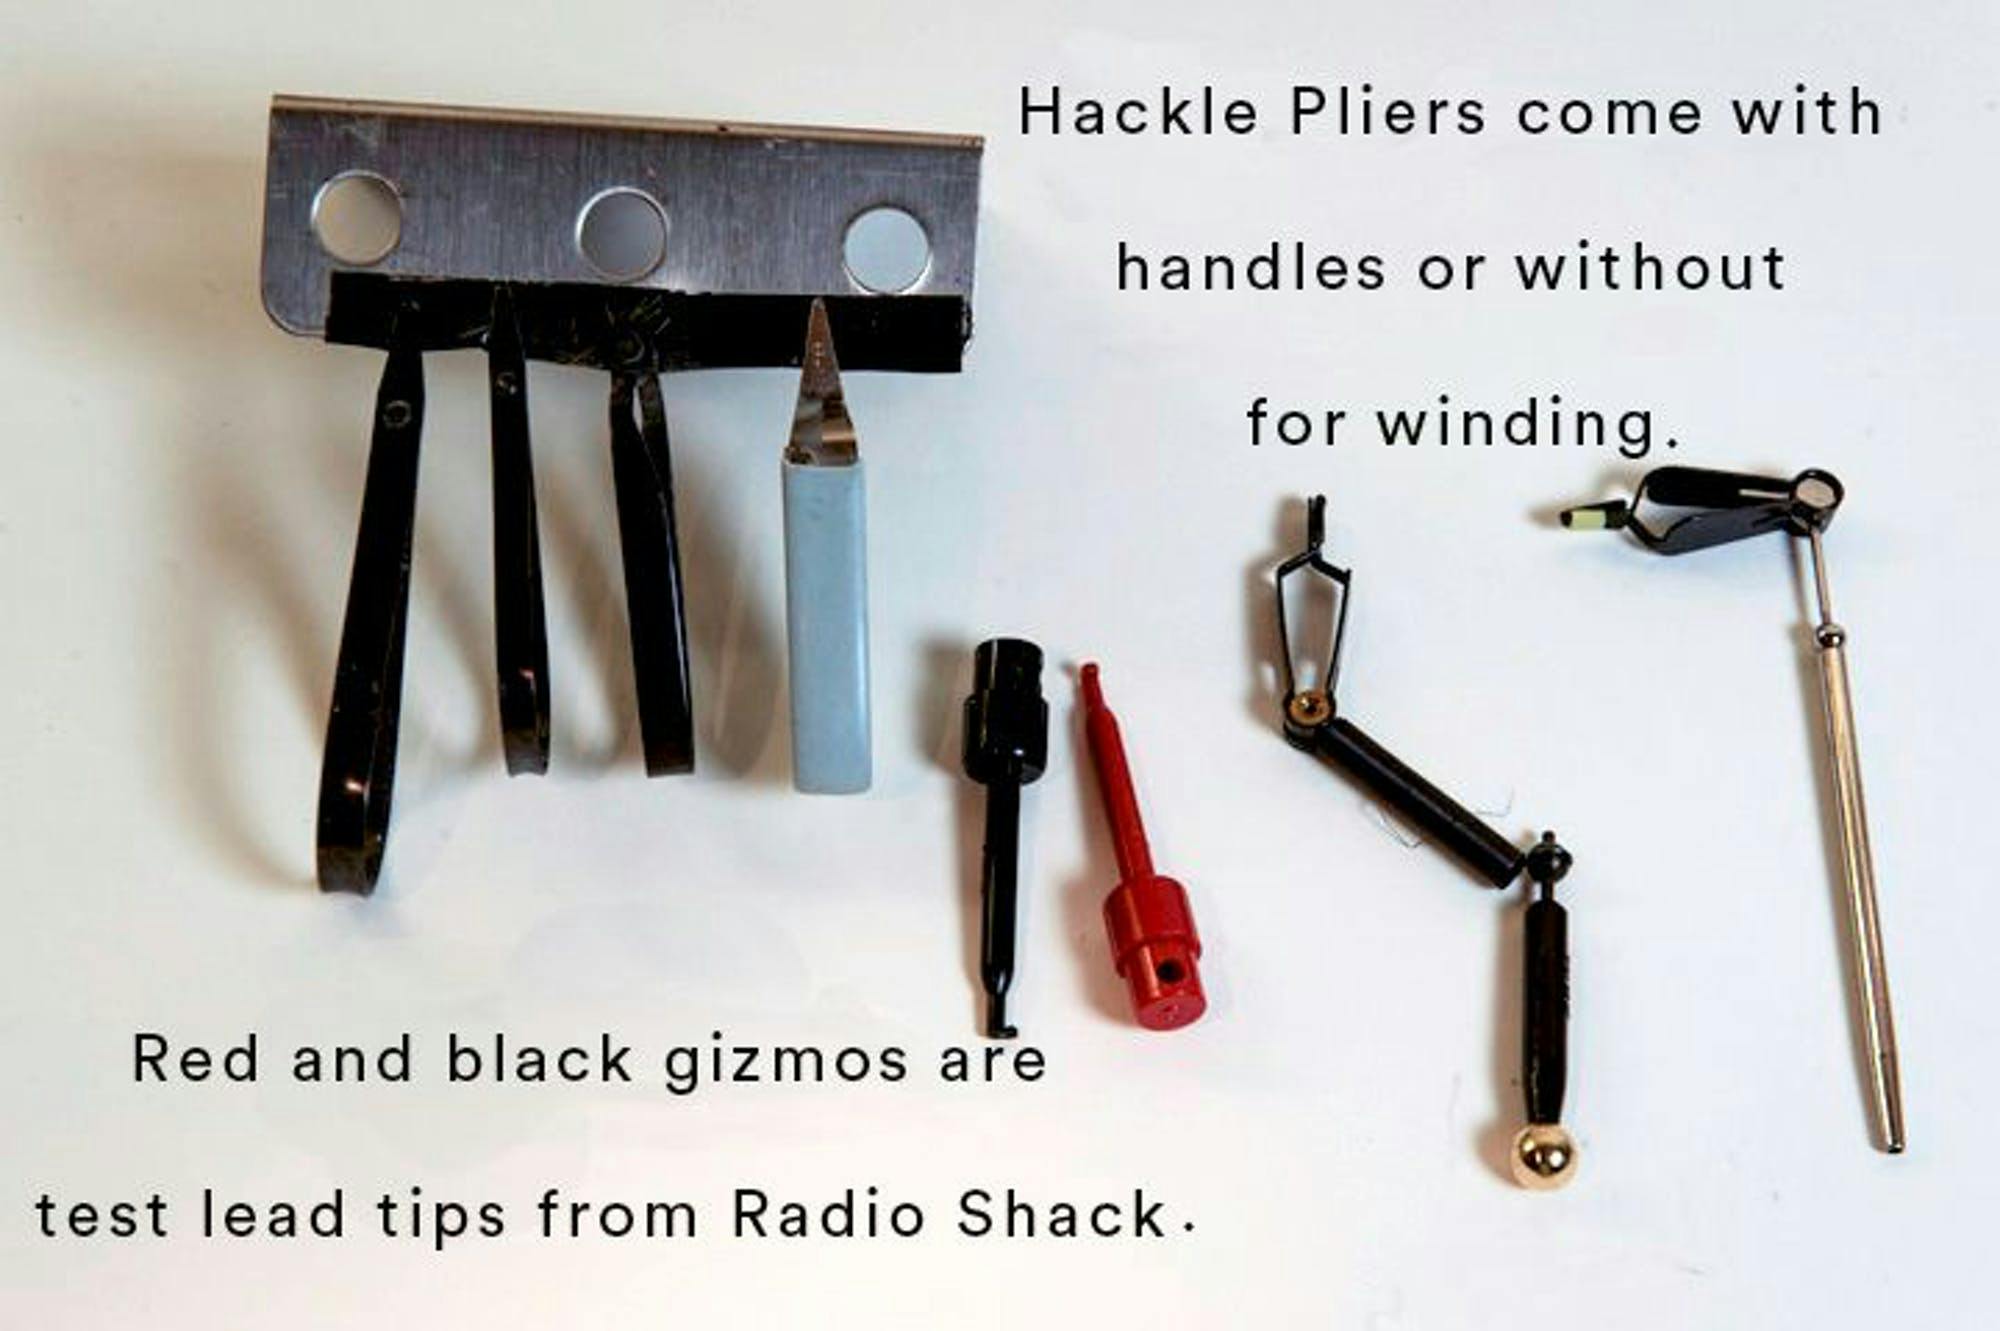 An image of hackle pliers and an assortment of tools on a white background. The text reads, "Hackle pliers come with handles or without for winding. Red and black gizmos are test lead tips from Radio Shack."